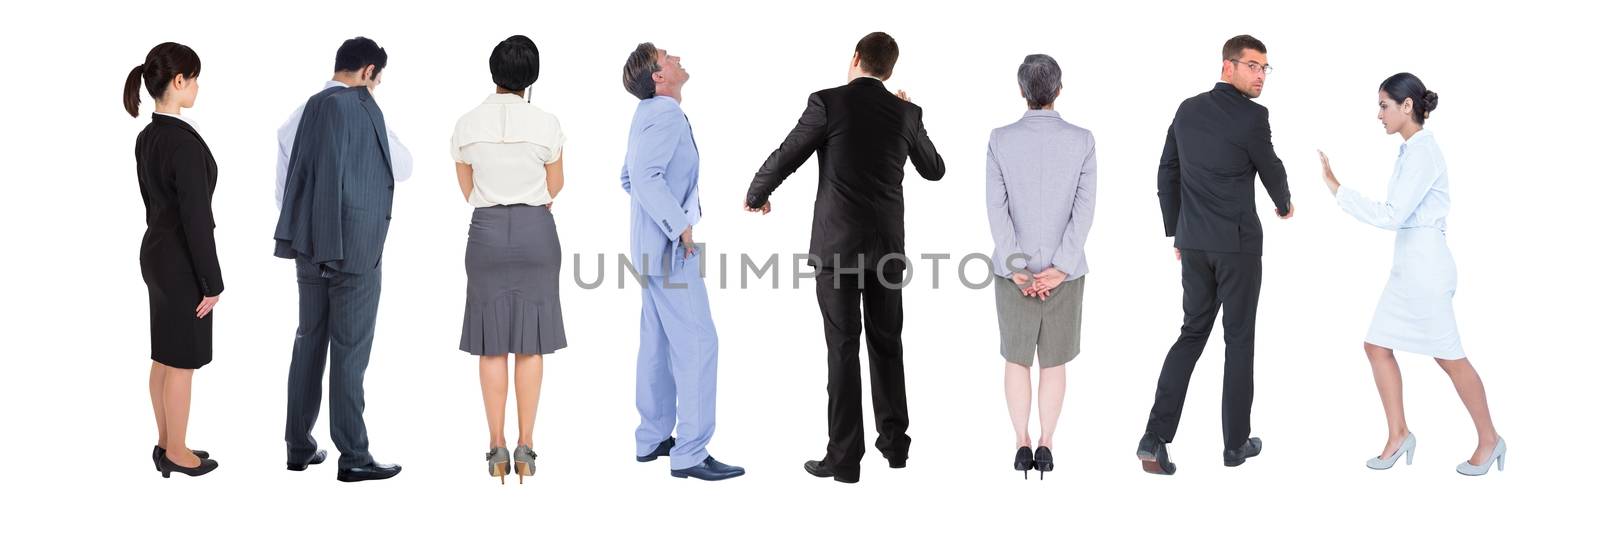 Digital composite of Group of Business People standing with white background